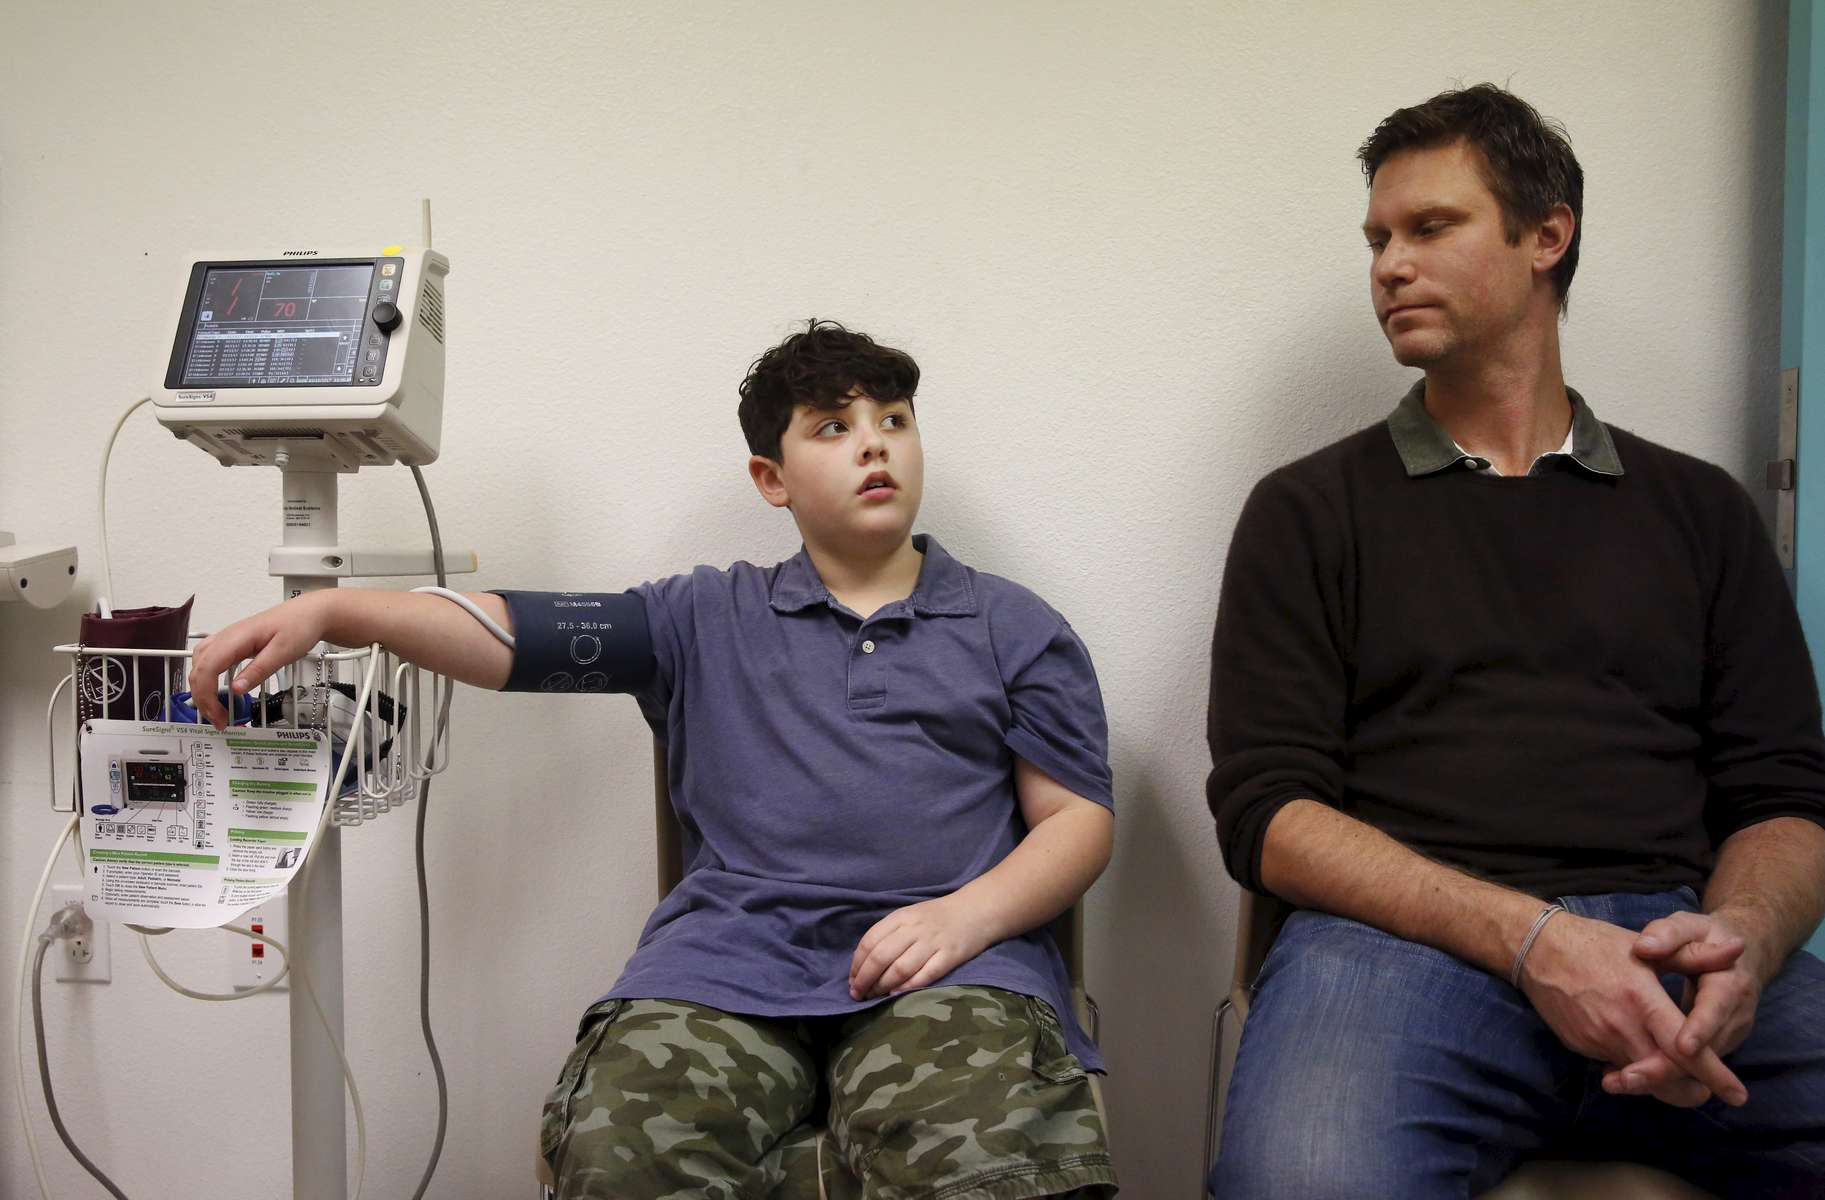  James Kaplan, 9, left, gets his vitals taken while sitting next to his dad Ben Kaplan during a medical appointment to determine if he is starting puberty at UCSF Benioff Children's Hospital's Child and Adolescent Gender Center Clinic March 15, 2017 in Oakland, Calif. James will be put on hormone blockers to stop the effects of puberty until he is a young teen. If he still insists on his current gender identity, he will then be put on cross-hormone therapy which will allow him to experience development that aligns with his gender identity. 